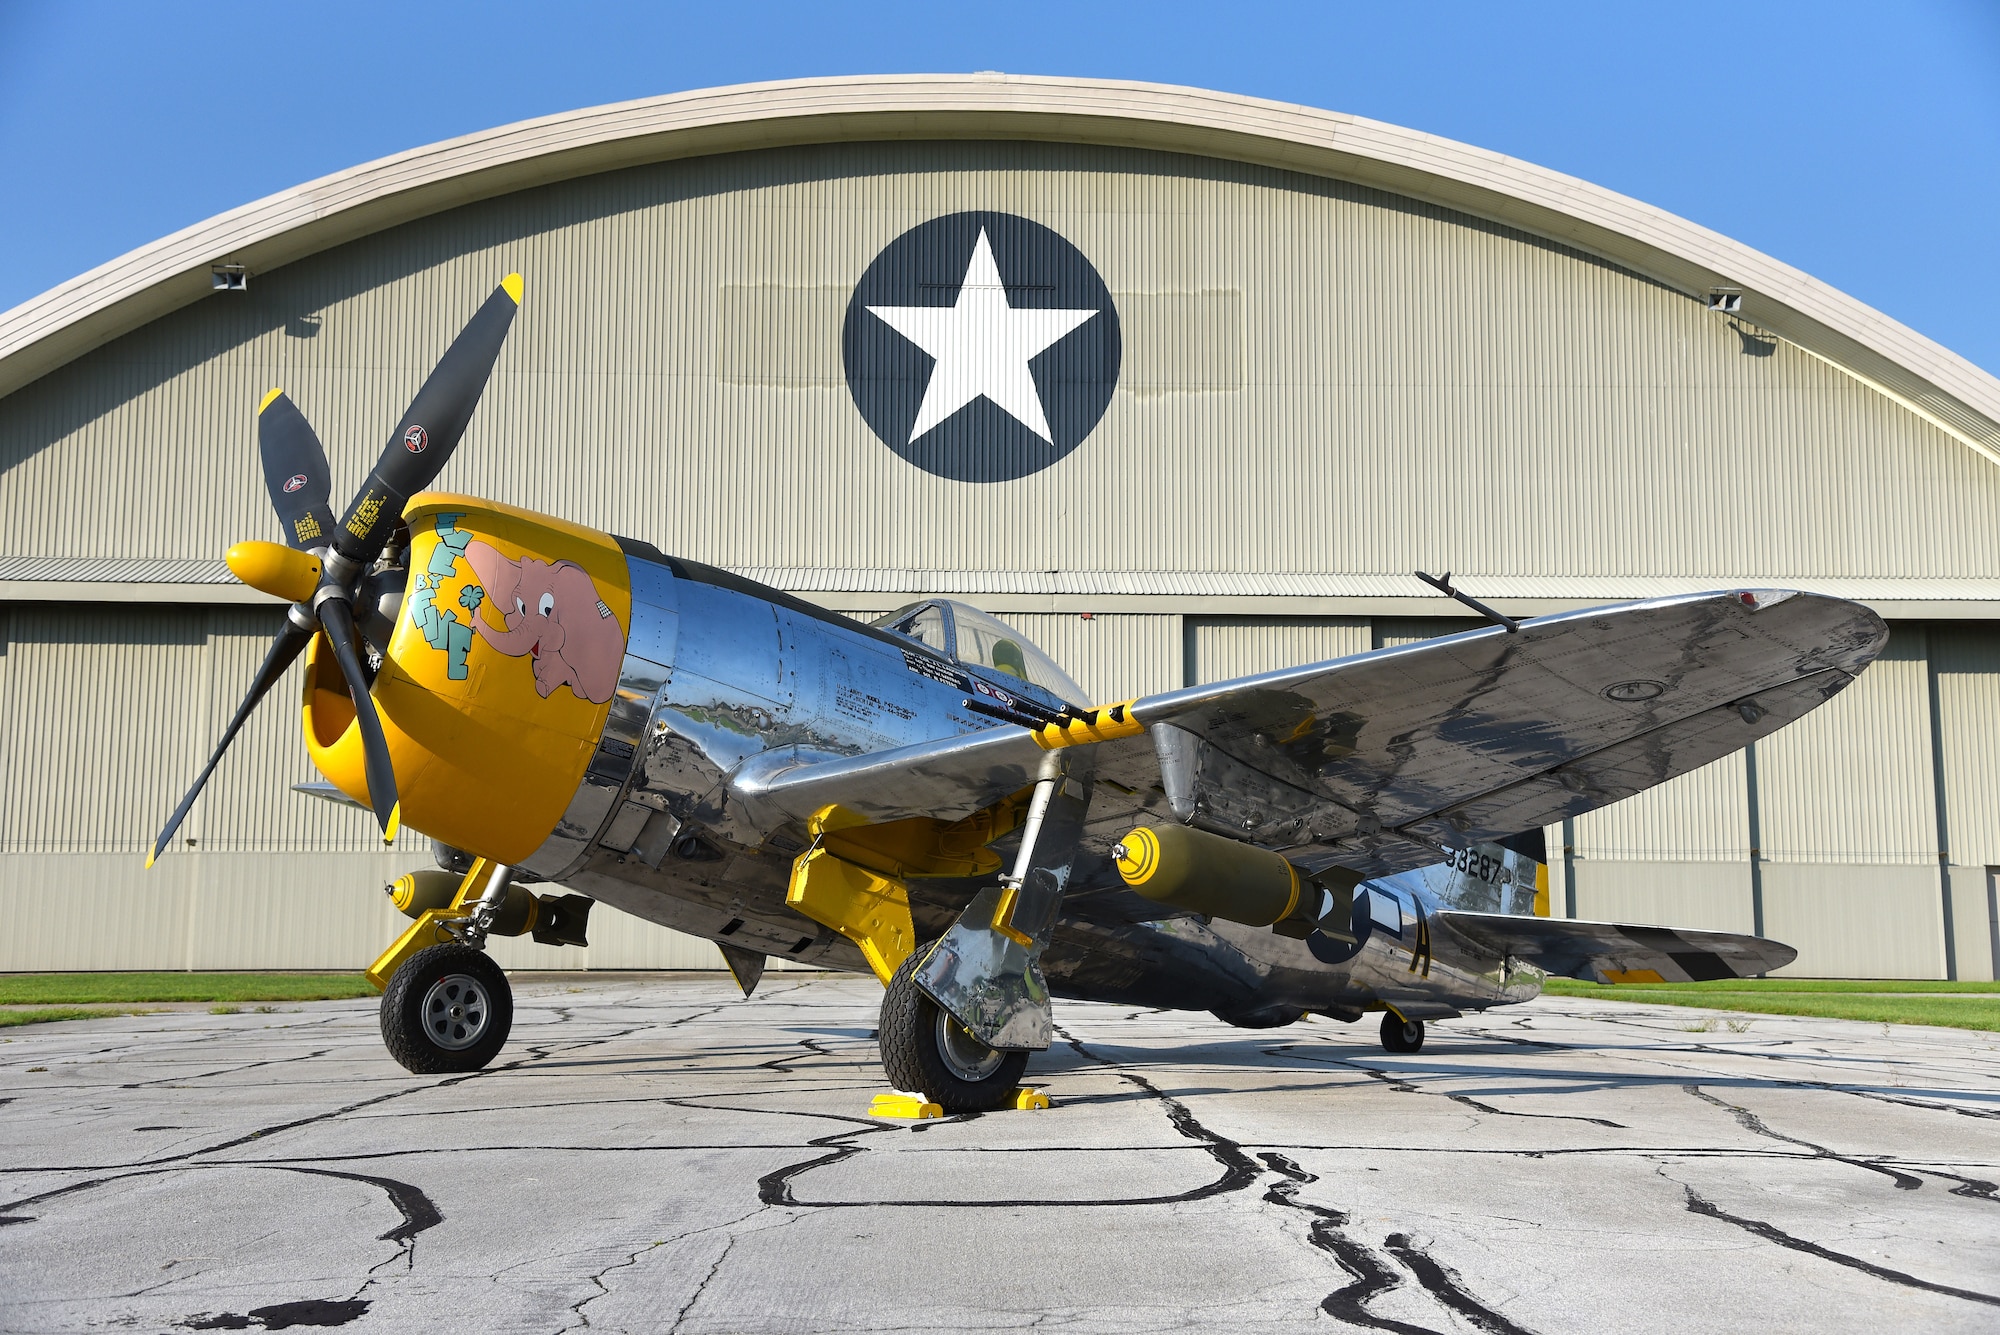 A view of the Republic P-47D (Bubble Canopy Version) before restoration crews at the National Museum of the U.S. Air Force moved the aircraft into the WWII Gallery on Aug. 14, 2018. Several WWII era aircraft on display were temporarily placed throughout the museum to provide adequate space for the Memphis Belle exhibit opening events. (U.S. Air Force photo by Ken LaRock)